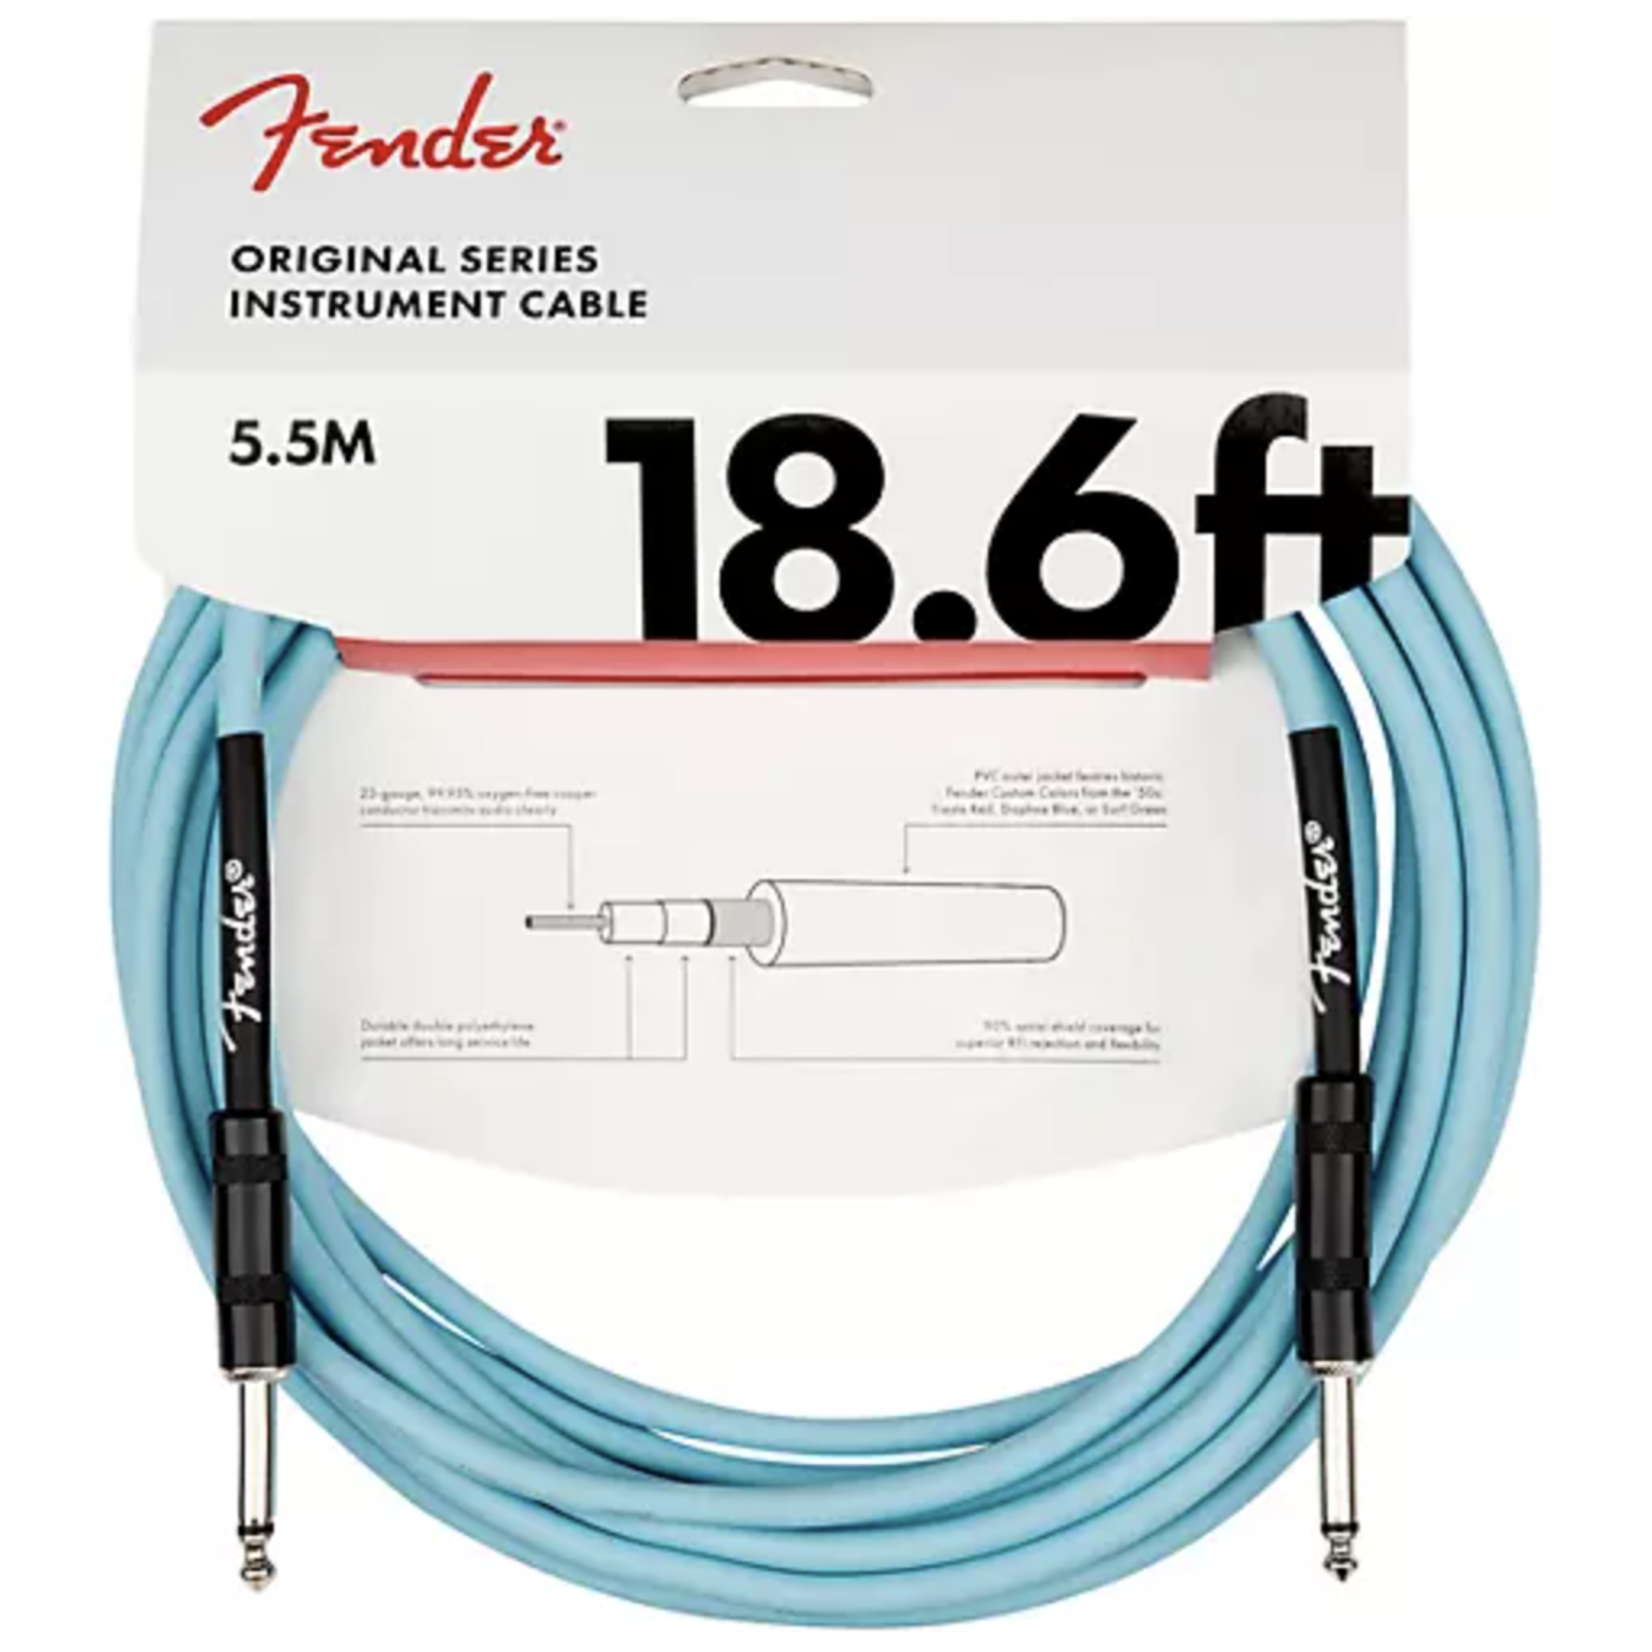 Fender Fender Original Series Limited Edition Instrument Cable Straight / Straight 5.5M/18.6Ft